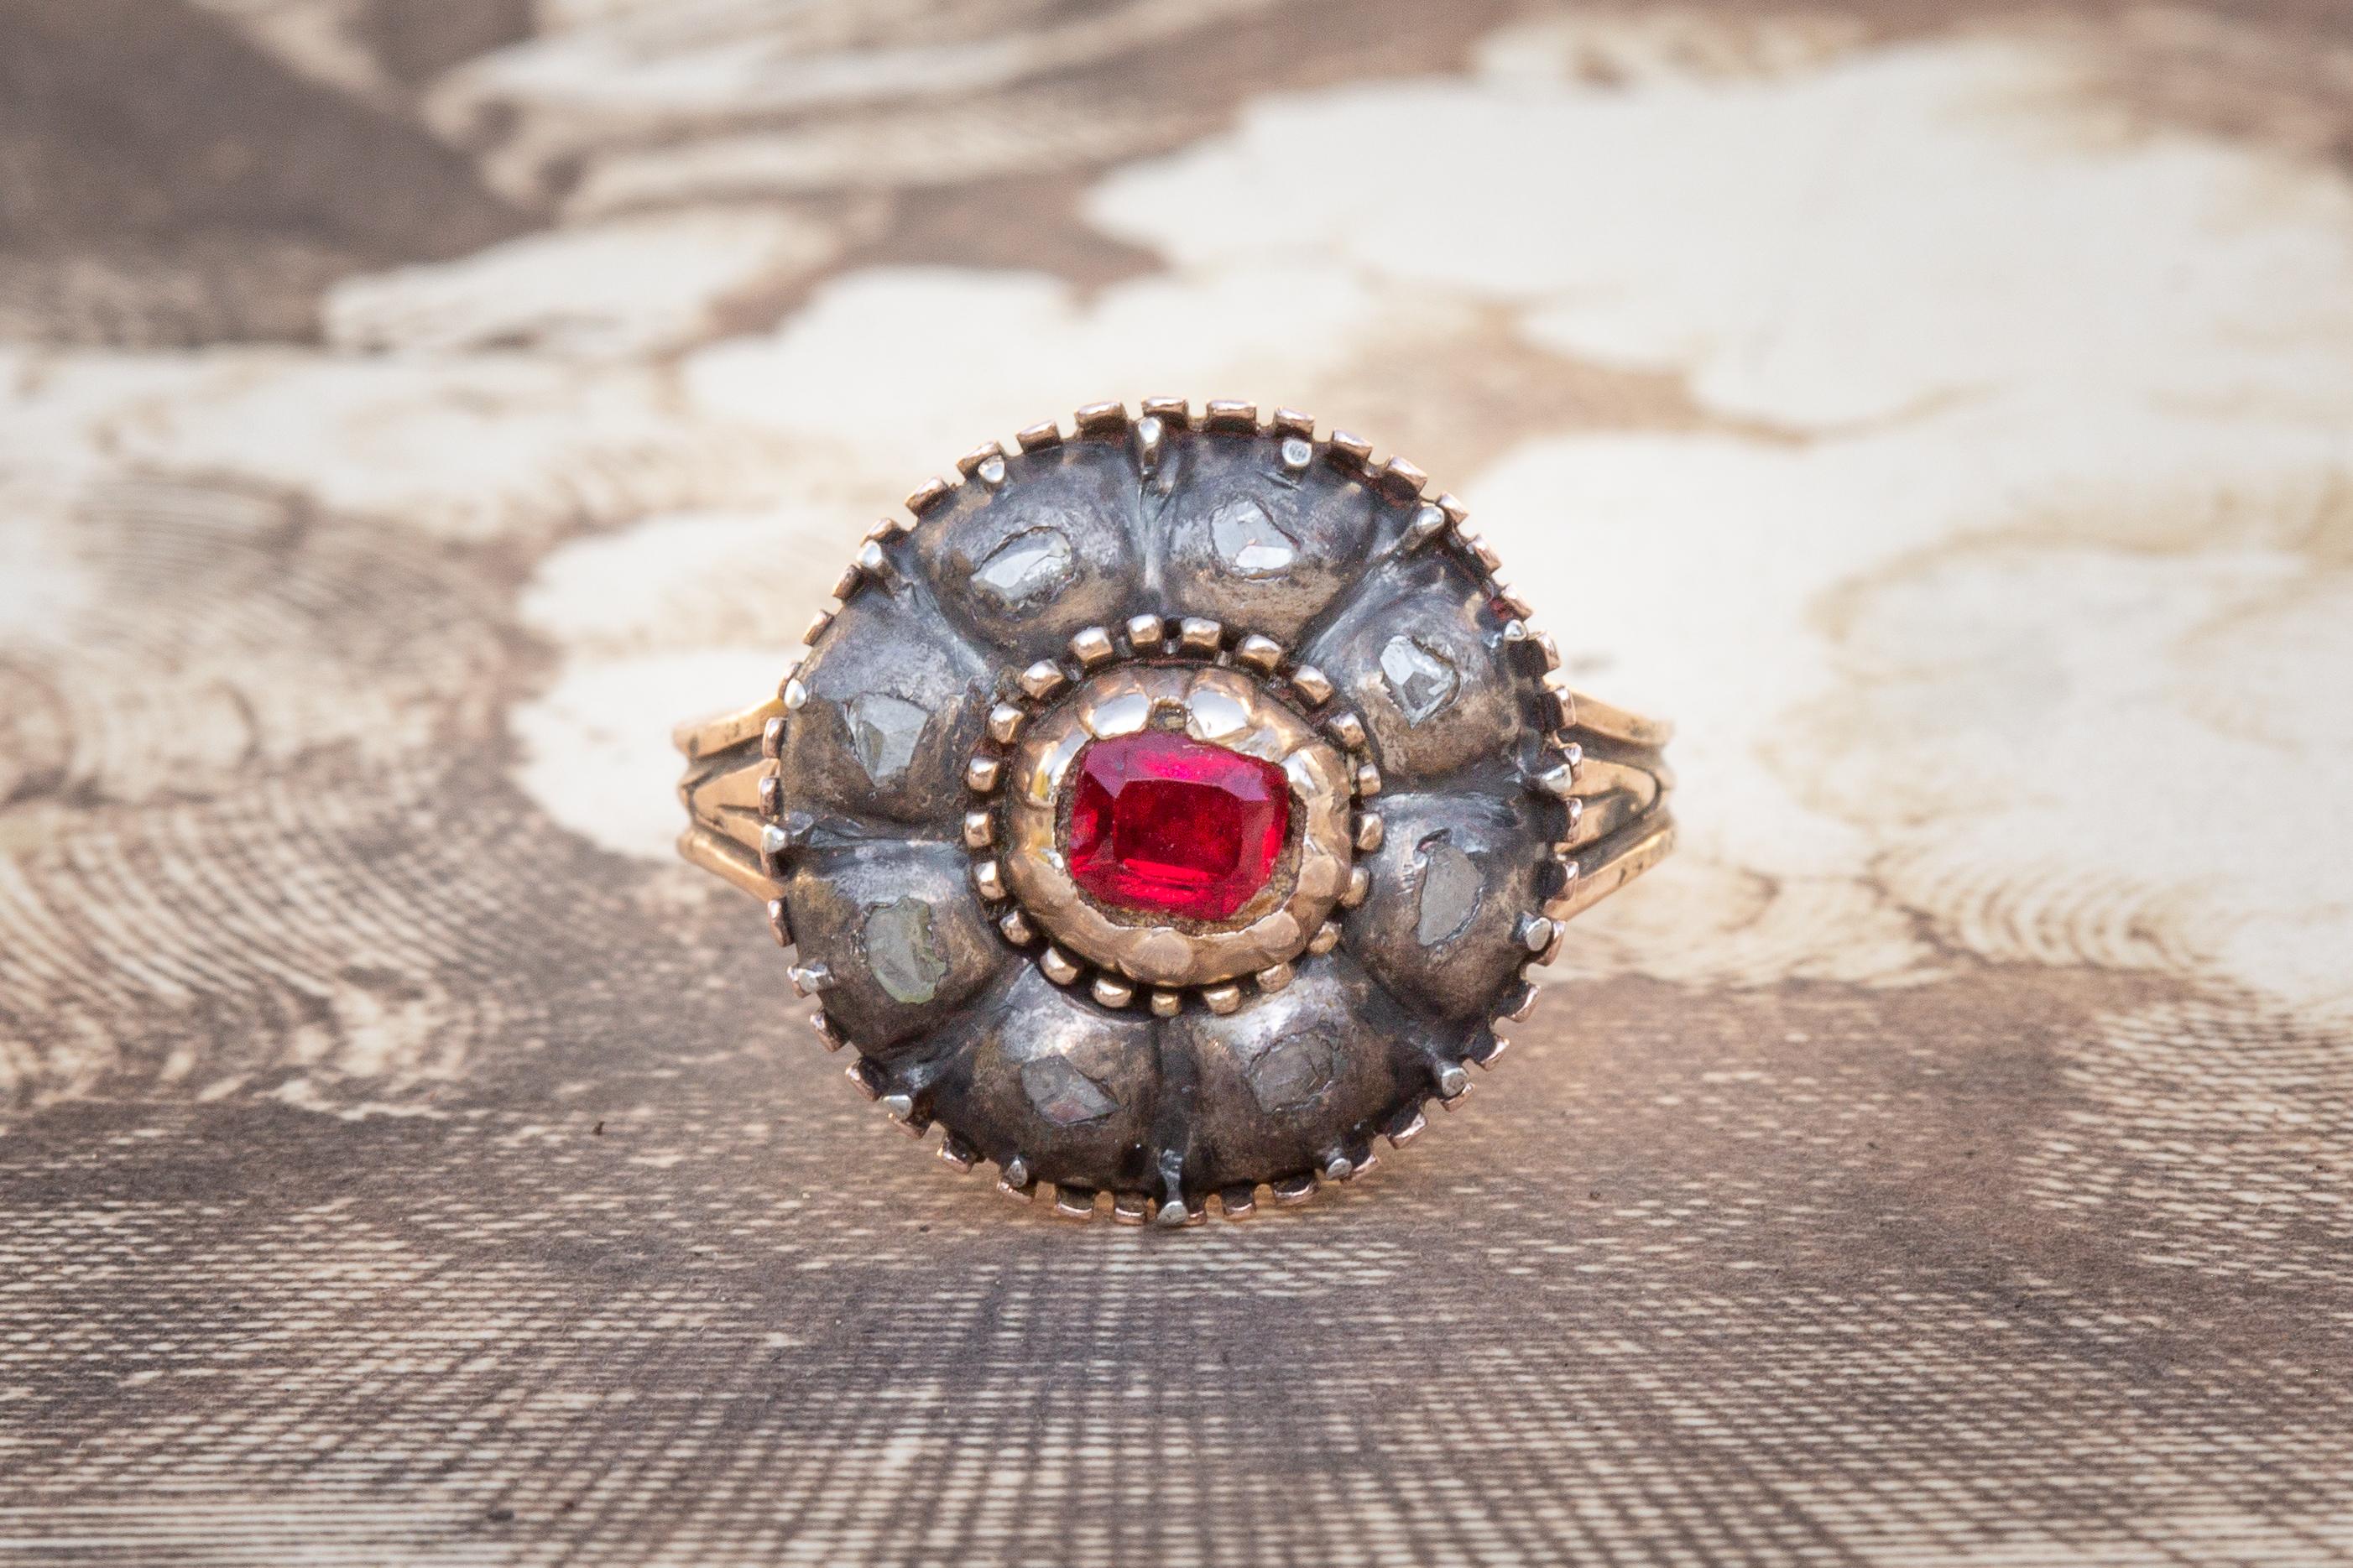 This lovely antique Italian cluster ring dates to around 1800 and is set with a garnet and diamonds. In the middle of the ring head lies a bright red garnet, surrounded by a cluster of 8 flat rose cut diamonds in rubover silver settings. The flower